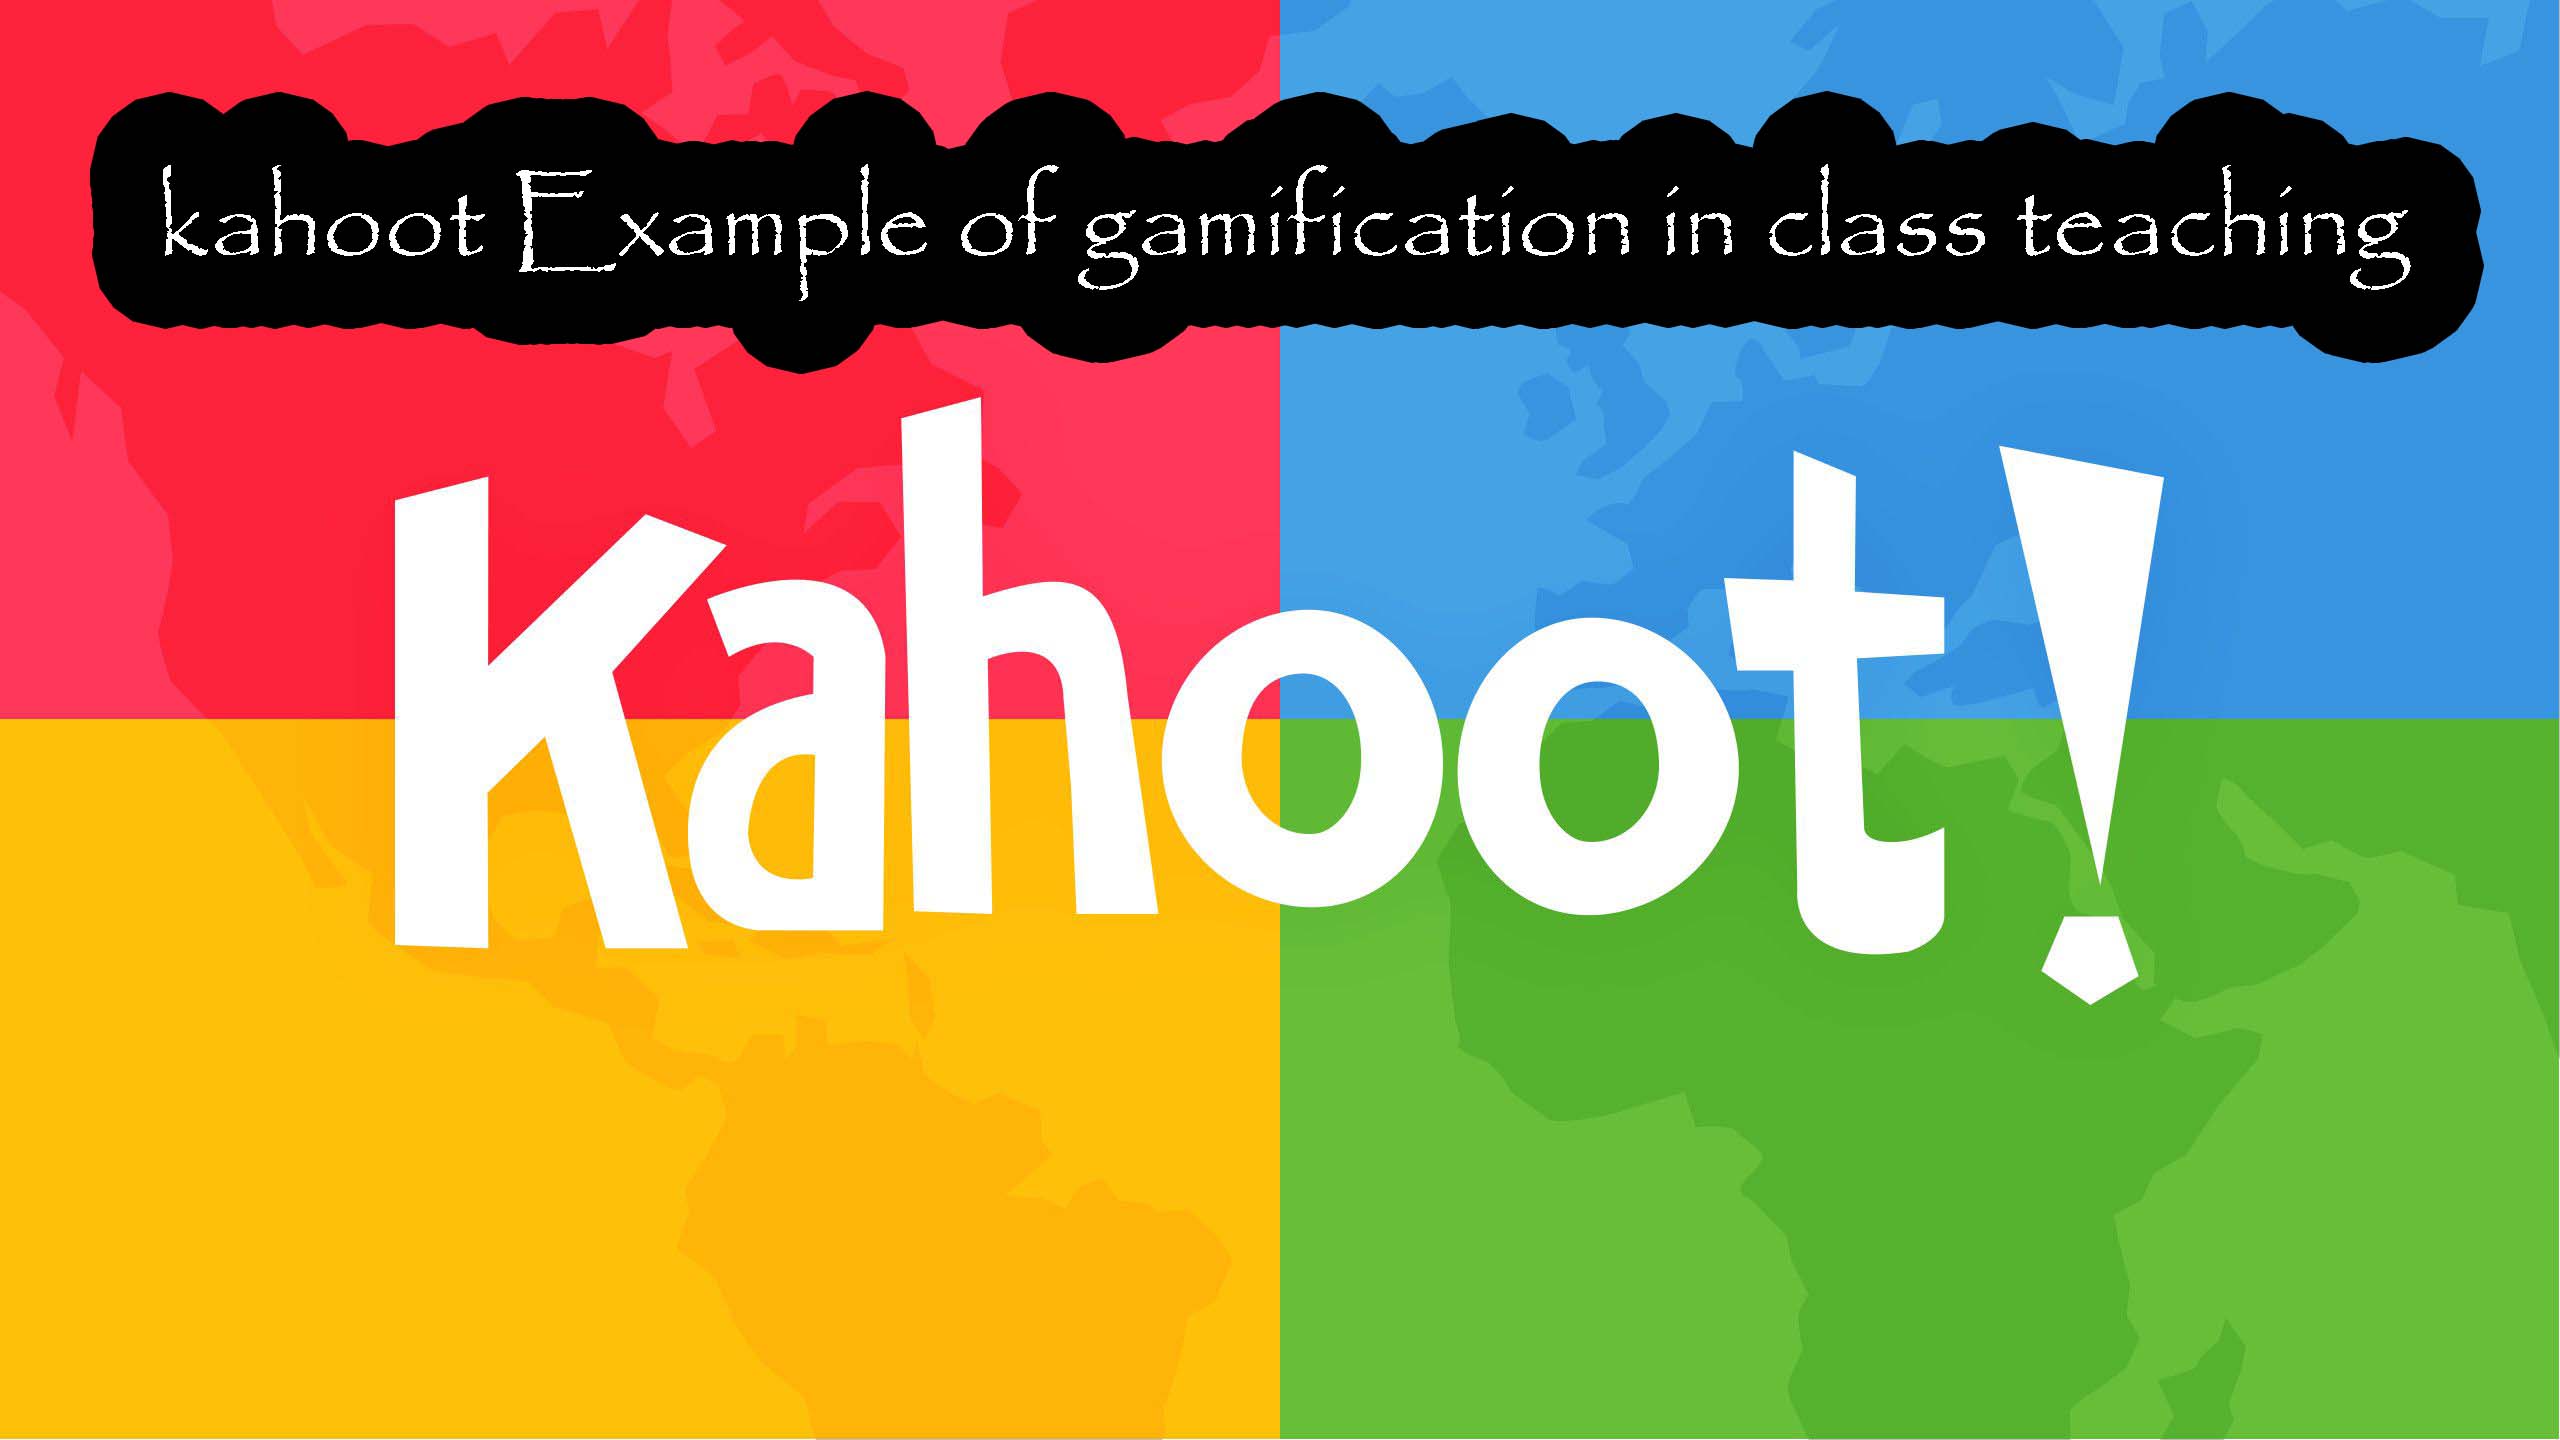 kahoot Example of gamification in class teaching